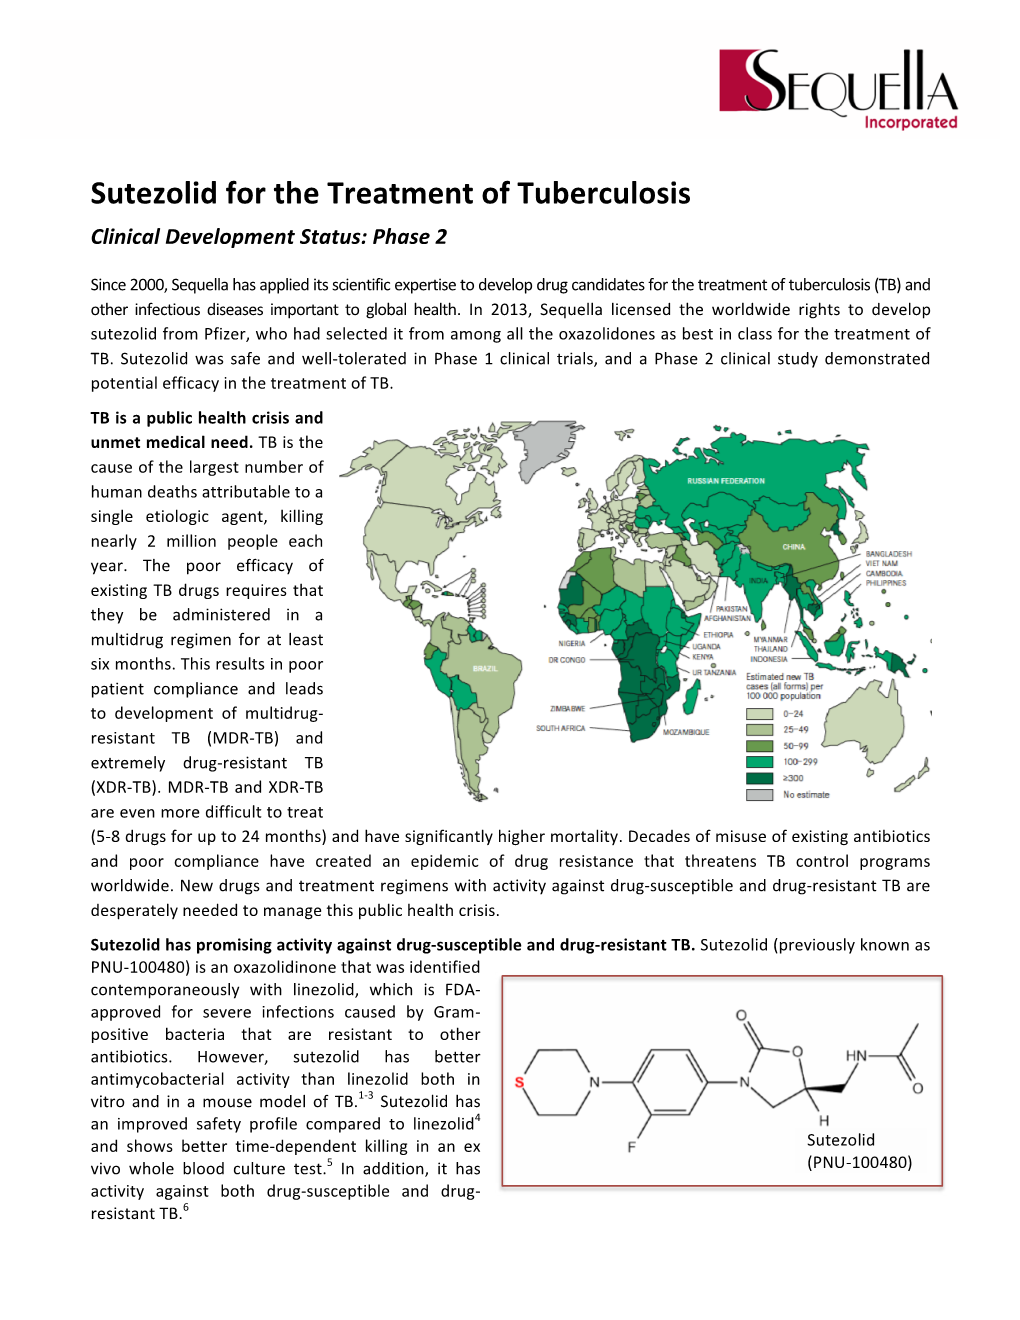 Sutezolid for the Treatment of Tuberculosis Clinical Development Status: Phase 2